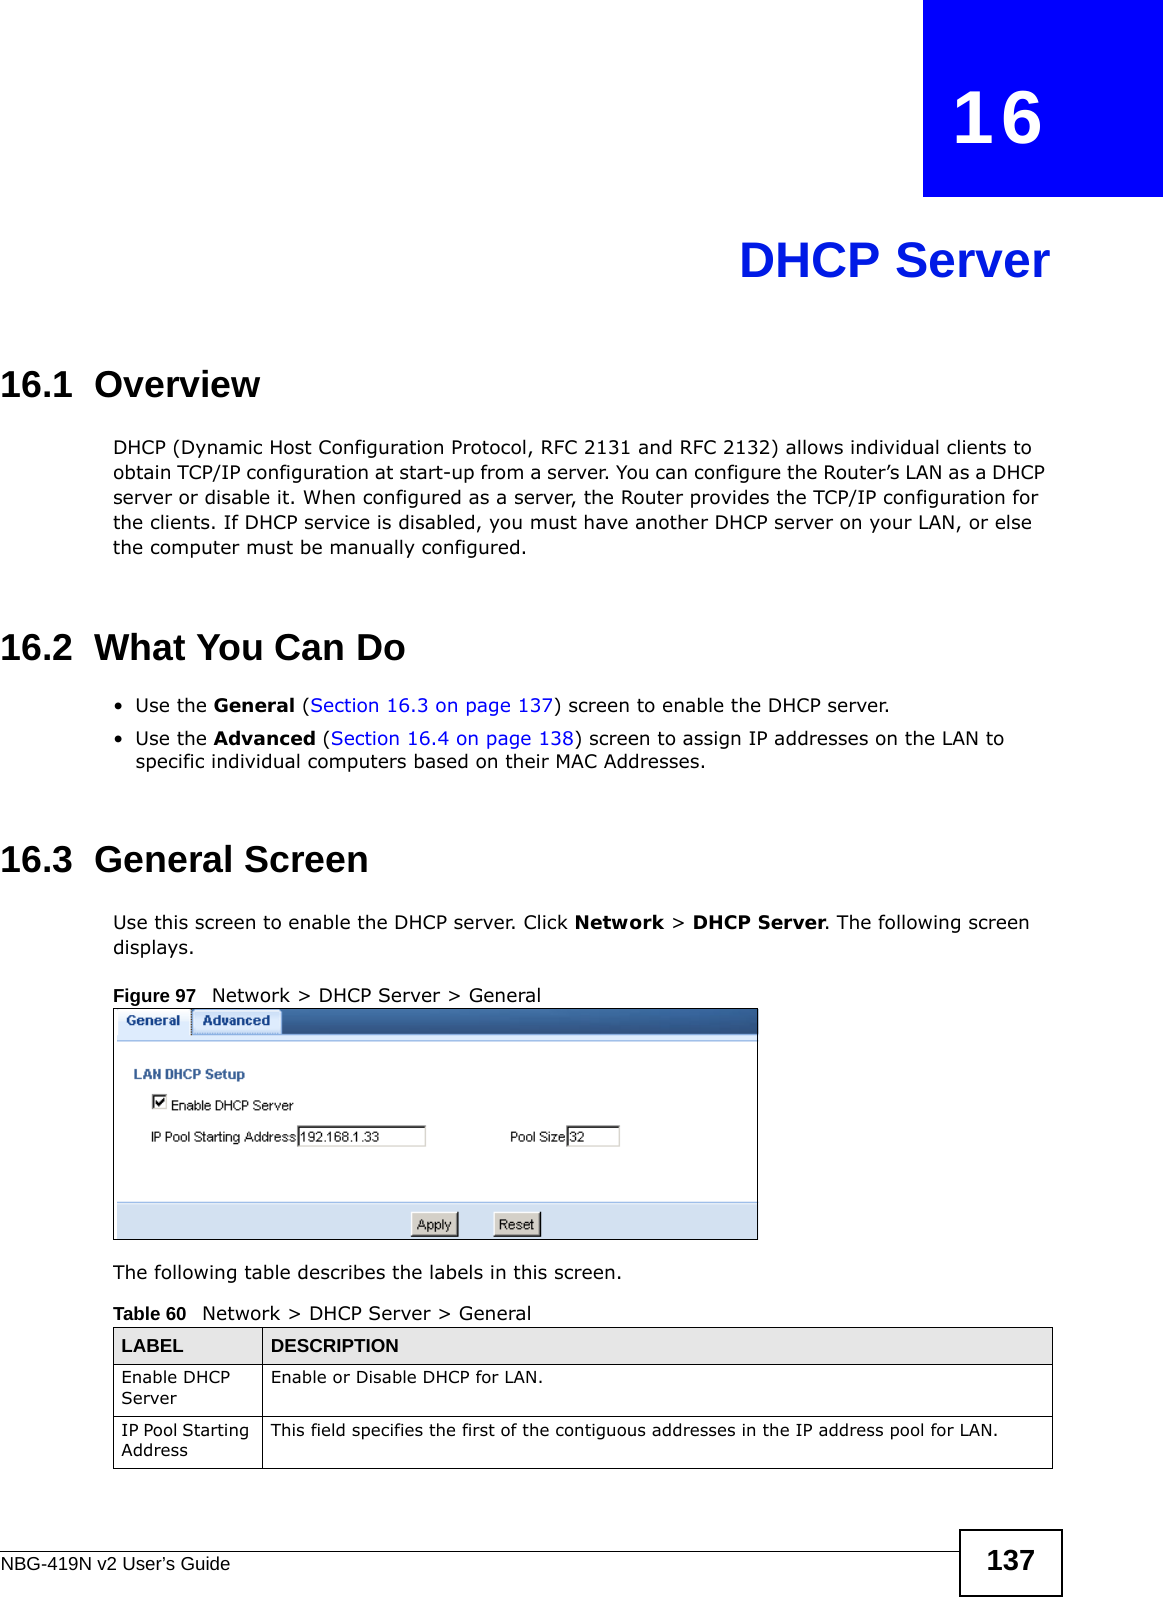 NBG-419N v2 User’s Guide 137CHAPTER   16DHCP Server16.1  OverviewDHCP (Dynamic Host Configuration Protocol, RFC 2131 and RFC 2132) allows individual clients to obtain TCP/IP configuration at start-up from a server. You can configure the Router’s LAN as a DHCP server or disable it. When configured as a server, the Router provides the TCP/IP configuration for the clients. If DHCP service is disabled, you must have another DHCP server on your LAN, or else the computer must be manually configured.16.2  What You Can Do•Use the General (Section 16.3 on page 137) screen to enable the DHCP server.•Use the Advanced (Section 16.4 on page 138) screen to assign IP addresses on the LAN to specific individual computers based on their MAC Addresses.16.3  General ScreenUse this screen to enable the DHCP server. Click Network &gt; DHCP Server. The following screen displays.Figure 97   Network &gt; DHCP Server &gt; General   The following table describes the labels in this screen.Table 60   Network &gt; DHCP Server &gt; General LABEL DESCRIPTIONEnable DHCP ServerEnable or Disable DHCP for LAN.IP Pool Starting AddressThis field specifies the first of the contiguous addresses in the IP address pool for LAN.